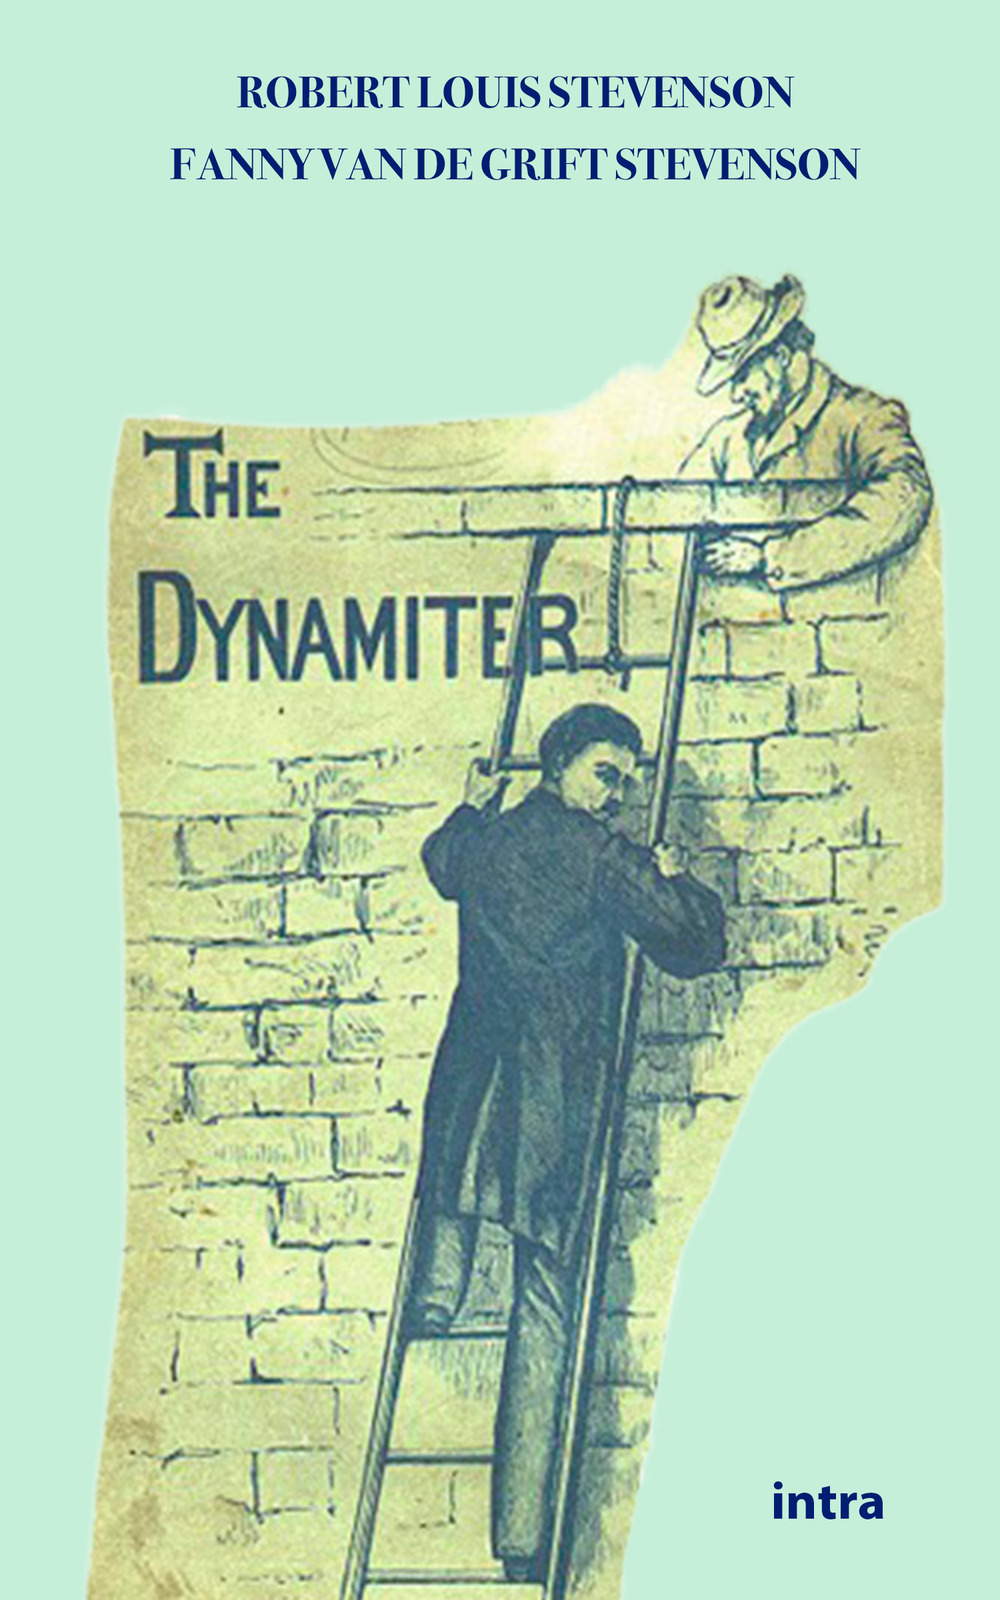 The dynamiter